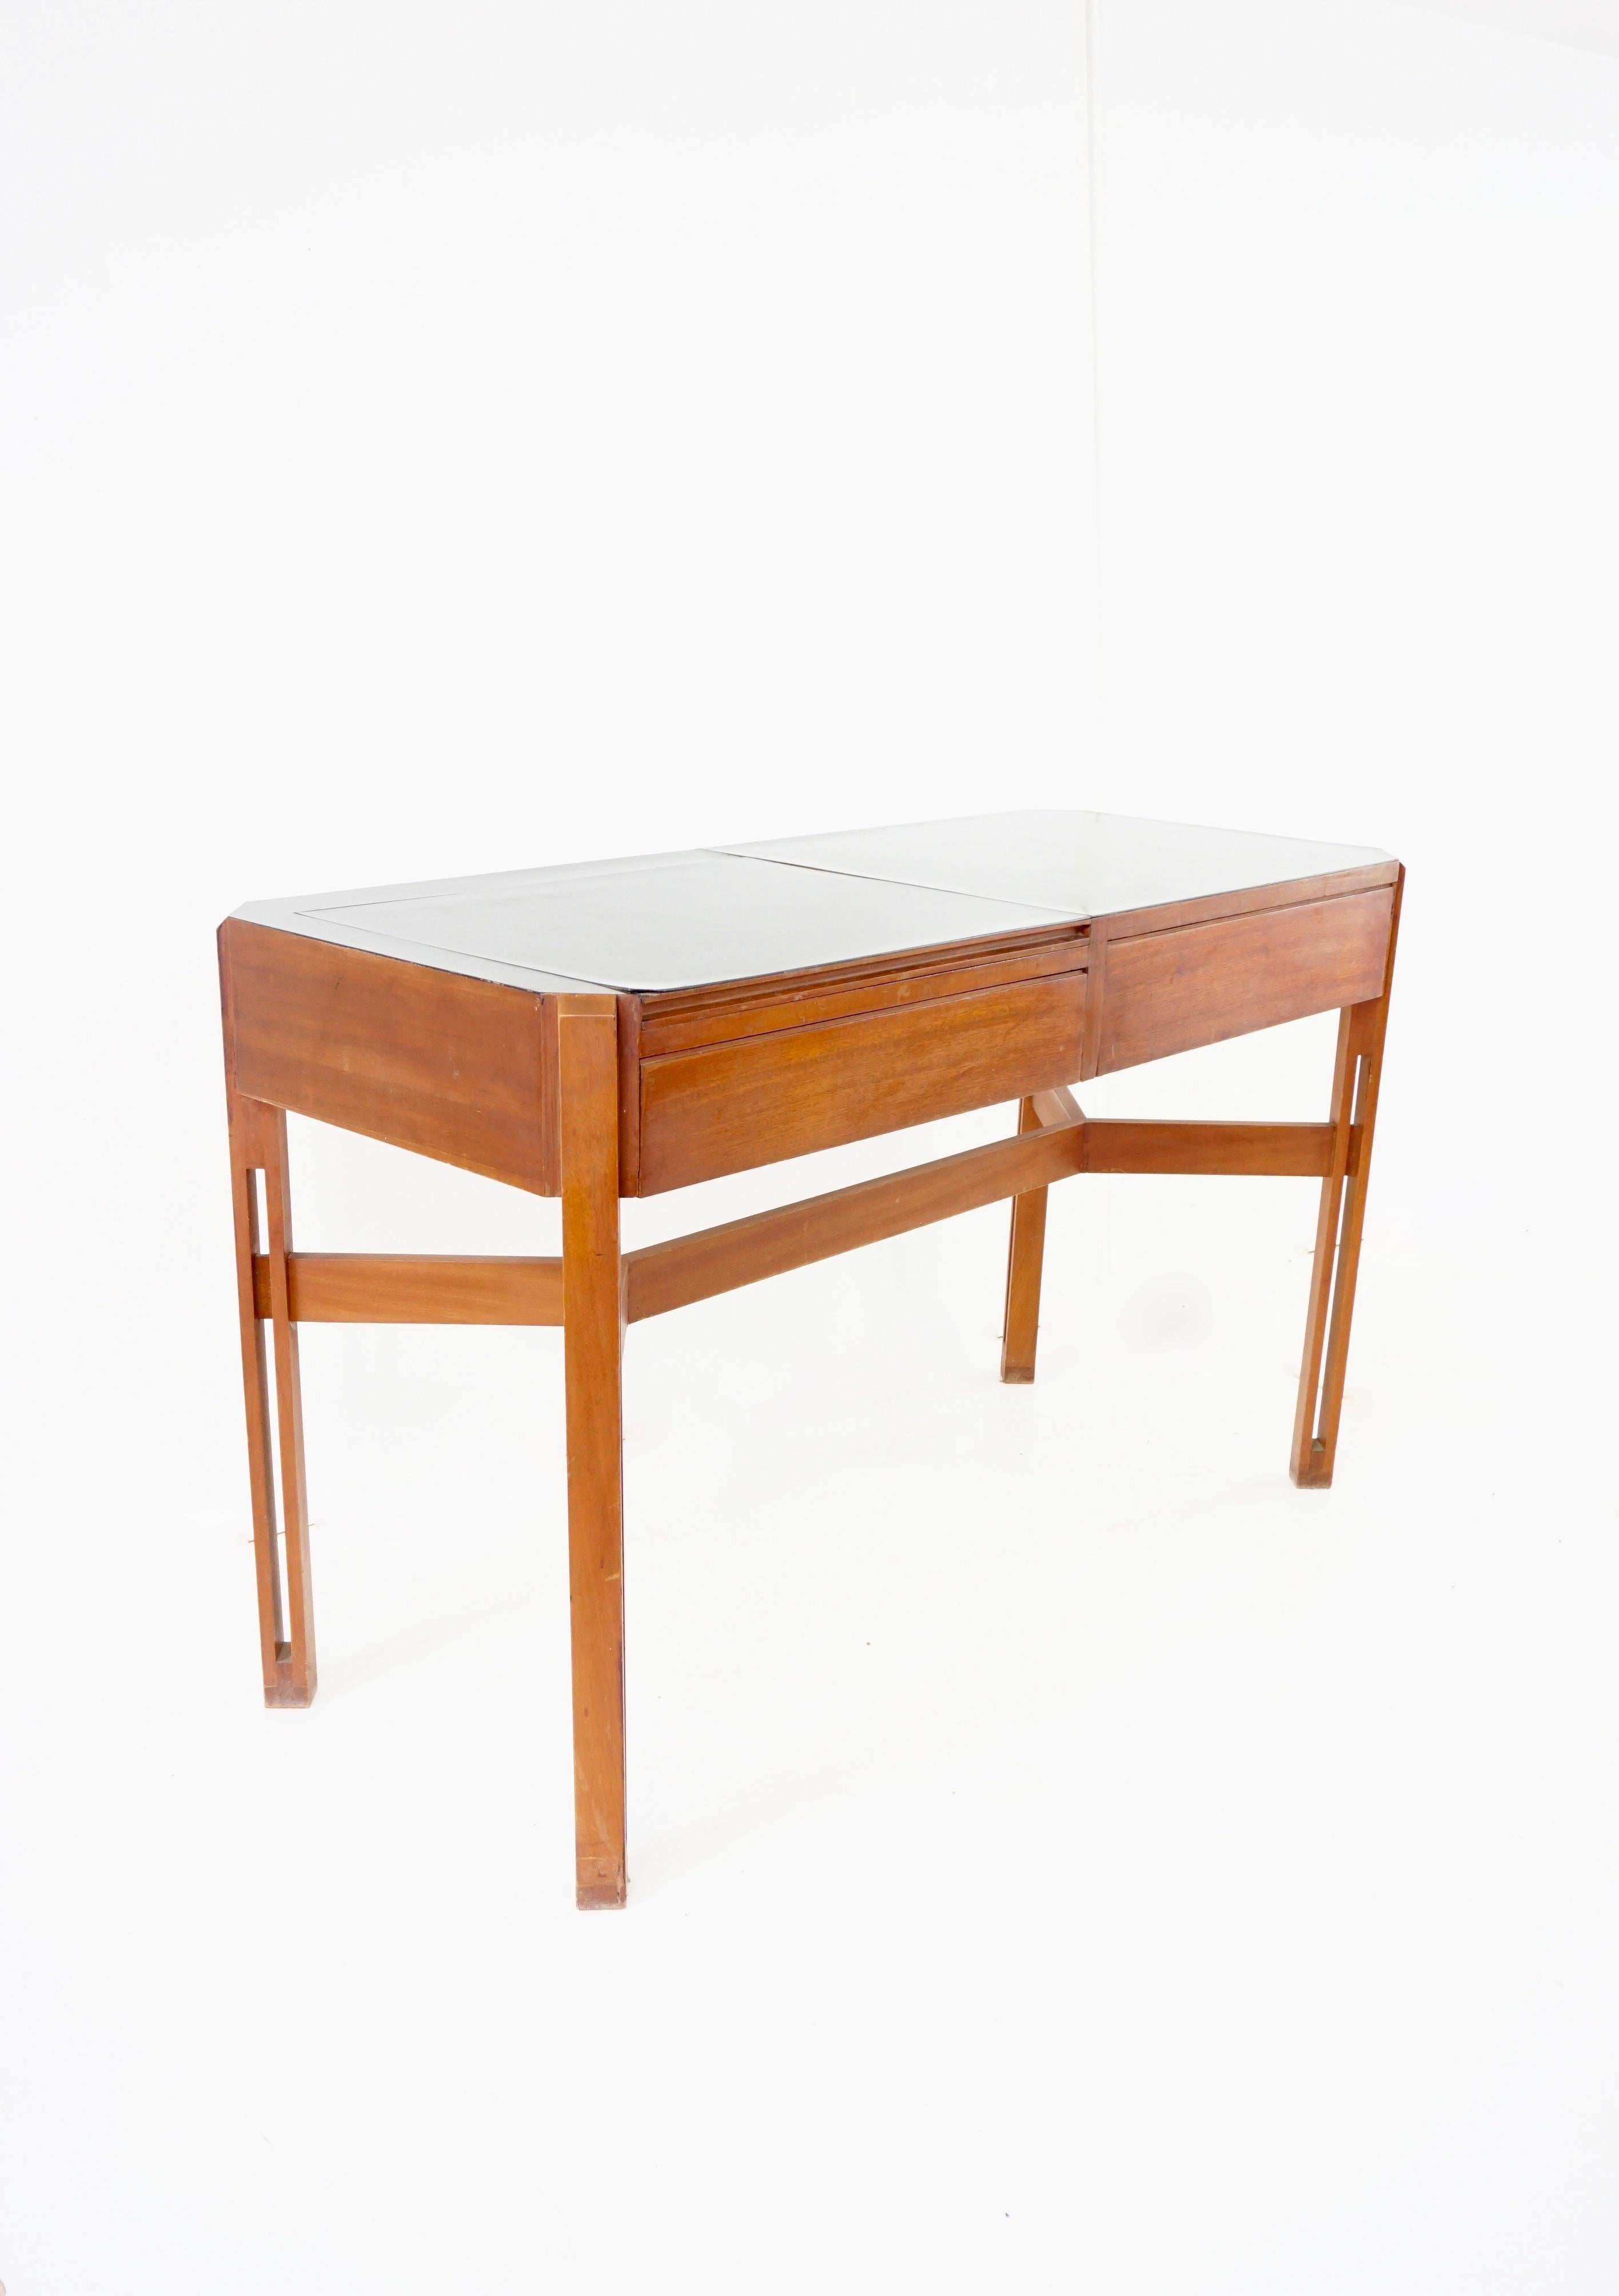 Mid-Century Modern Ico Parisi Rare Large Wood and Laminate Desk with Mirror, Hotel Lorena, 1959.60 For Sale